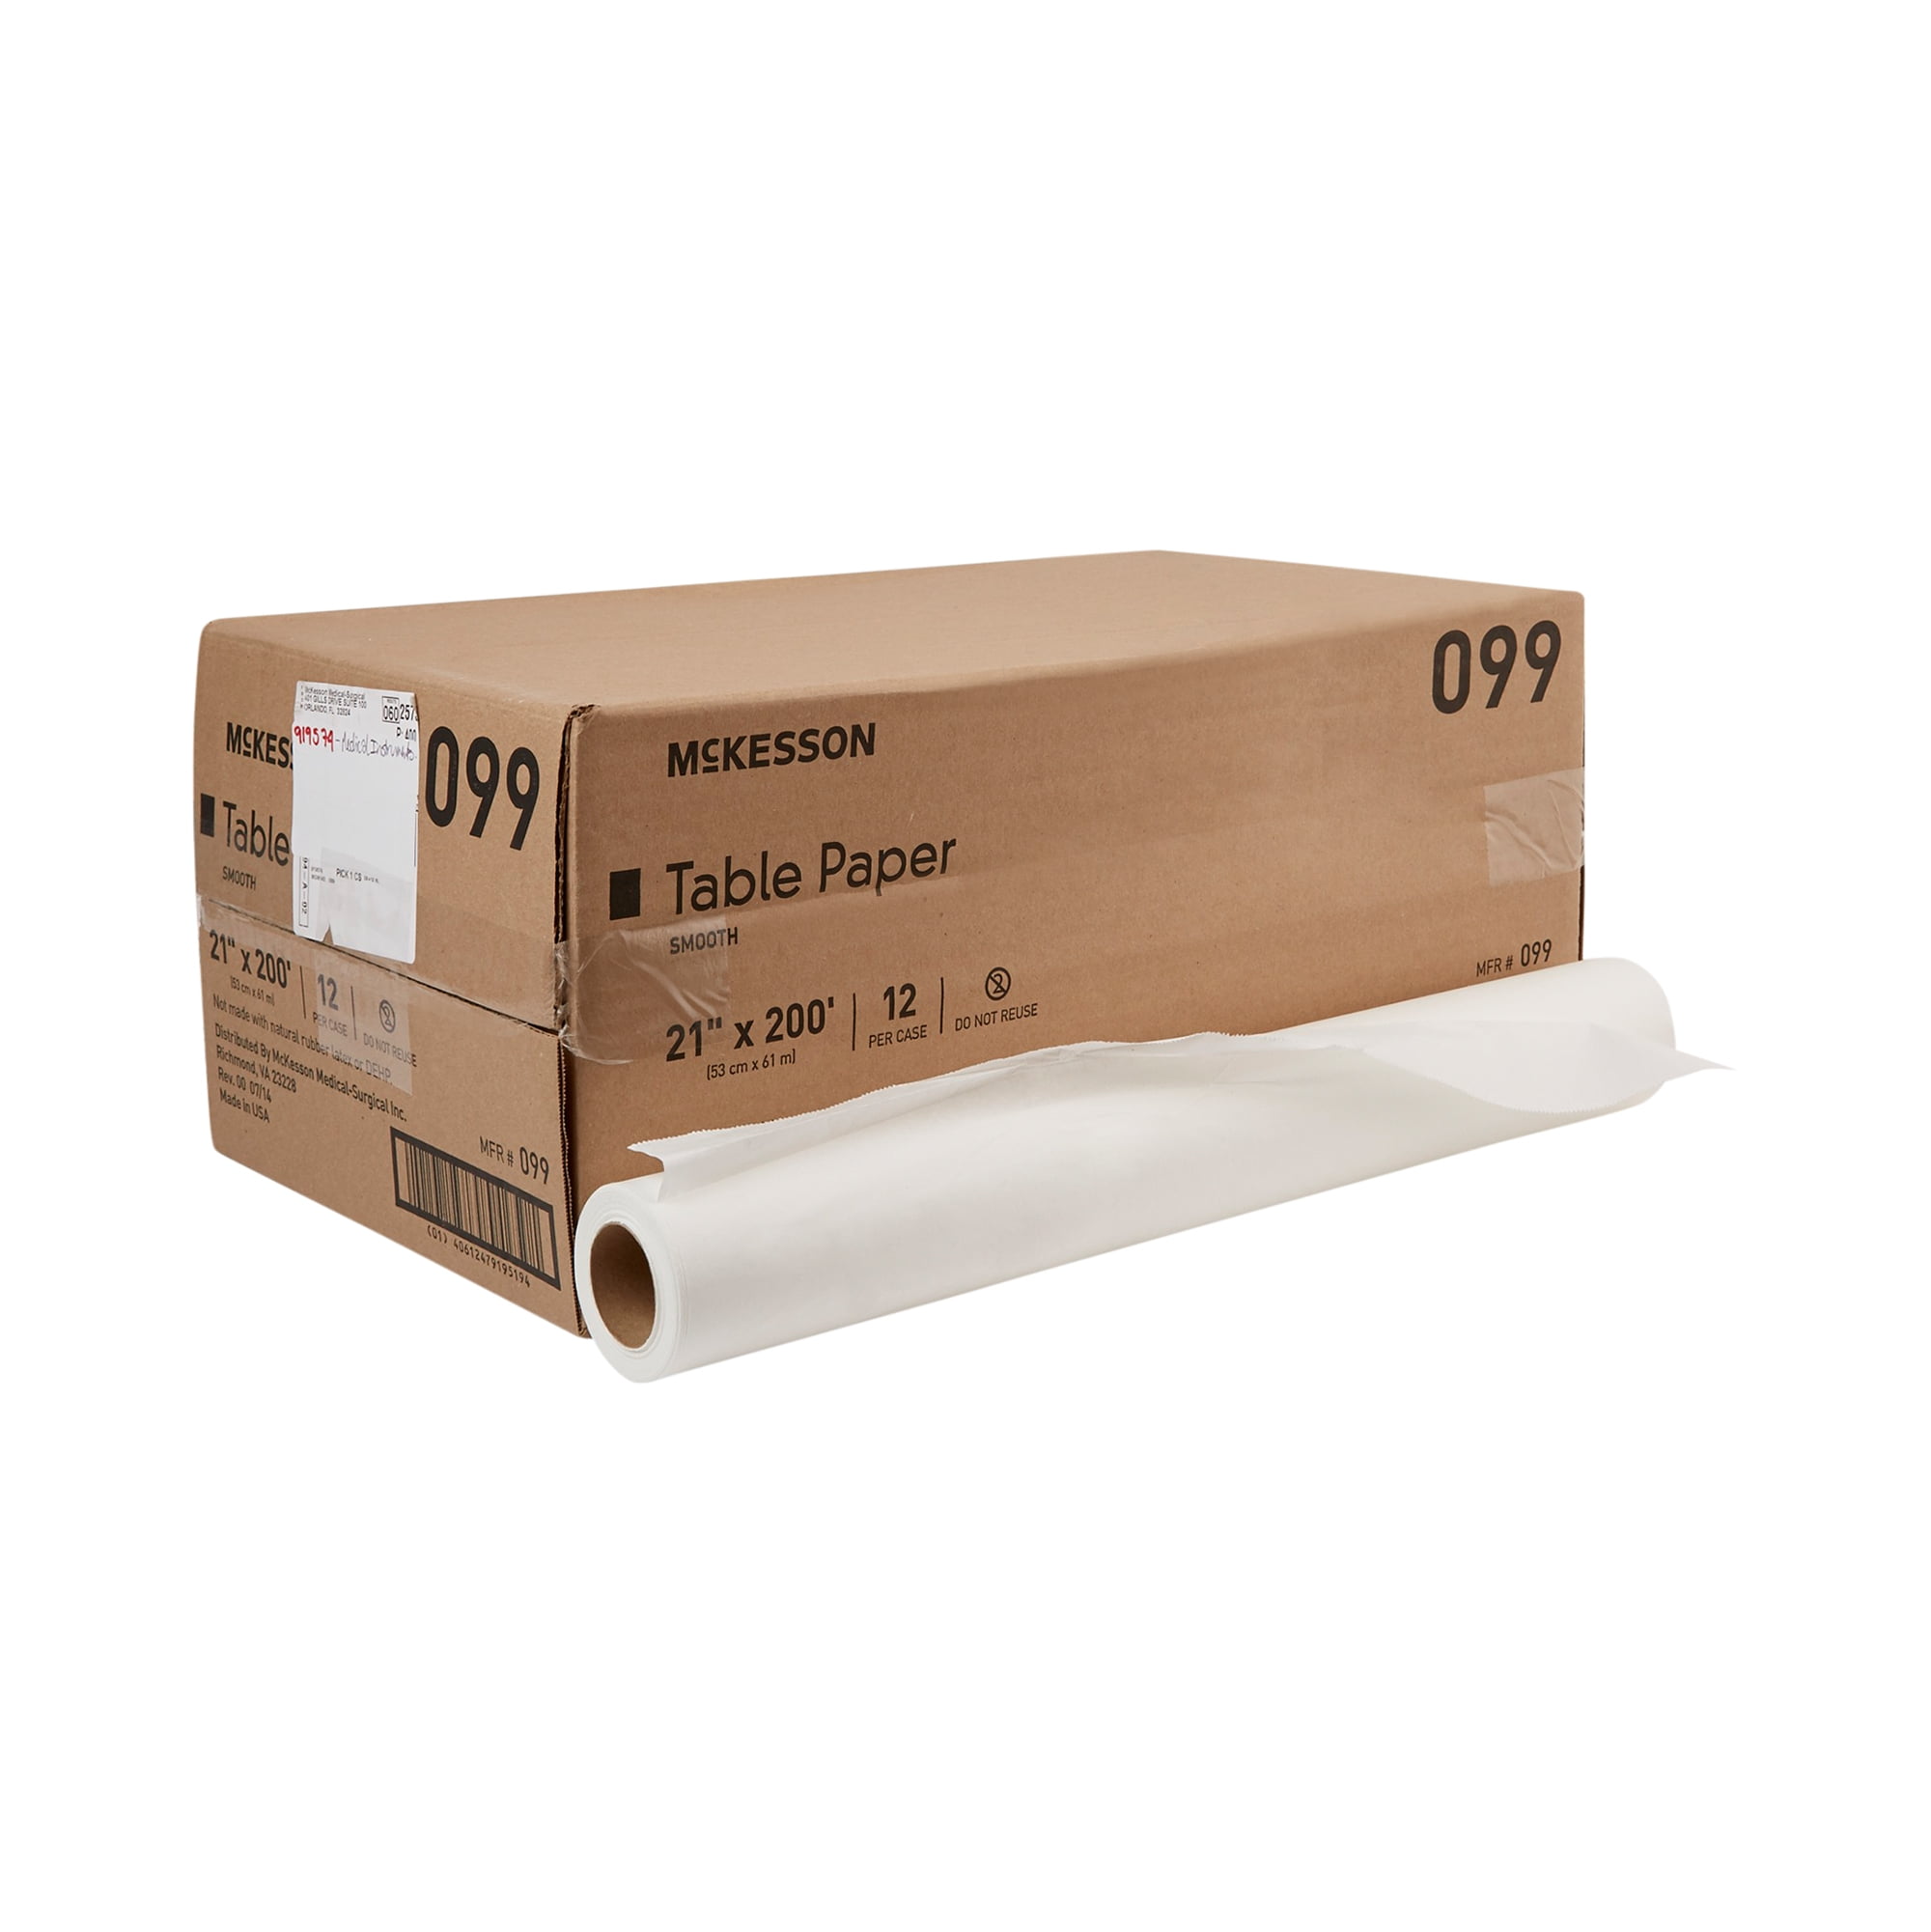 Barriers Exam Table Paper, White, Smooth